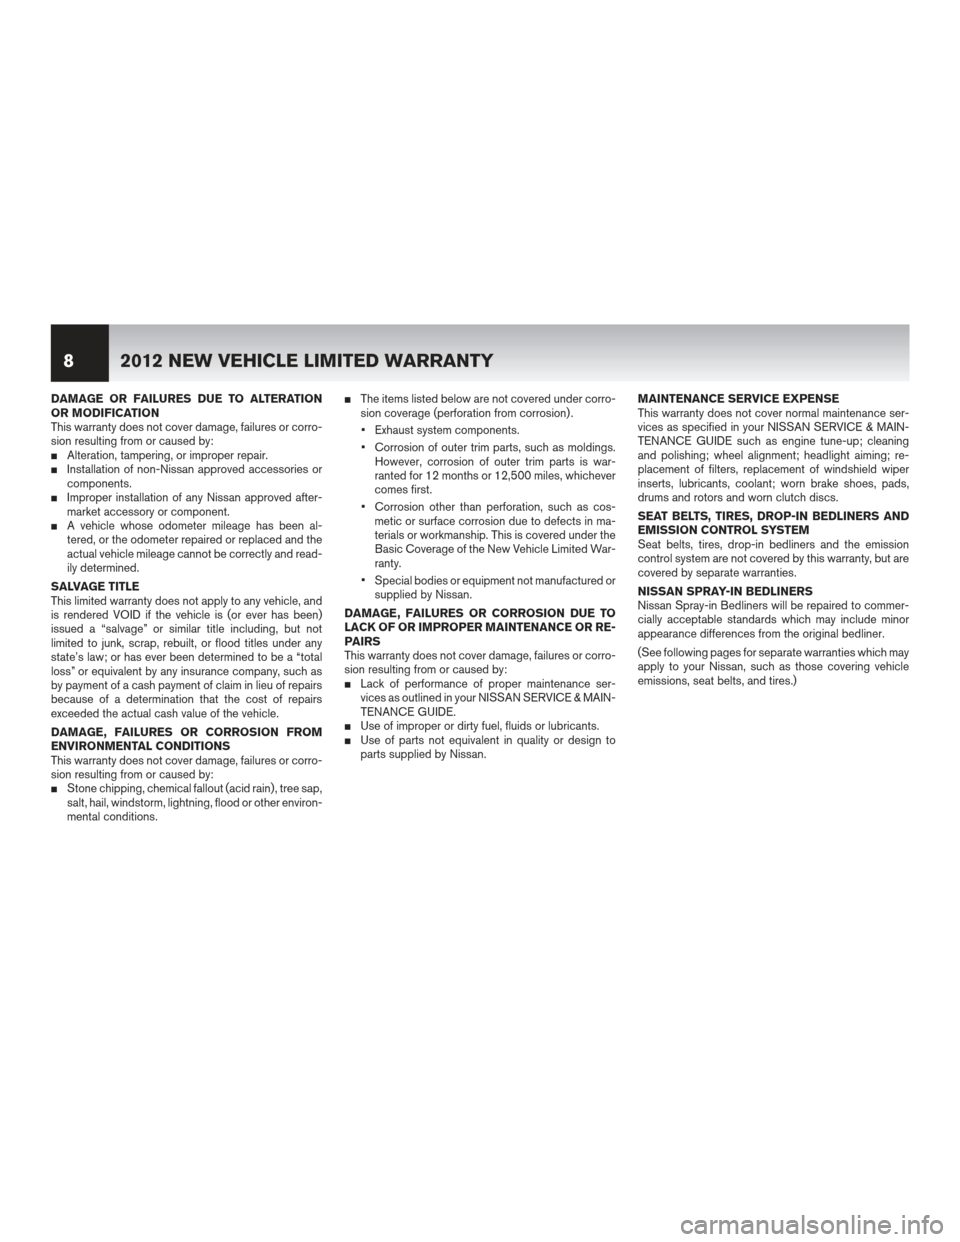 NISSAN MURANO 2012 2.G Warranty Booklet DAMAGE OR FAILURES DUE TO ALTERATION
OR MODIFICATION
This warranty does not cover damage, failures or corro-
sion resulting from or caused by:
Alteration, tampering, or improper repair.Installation 